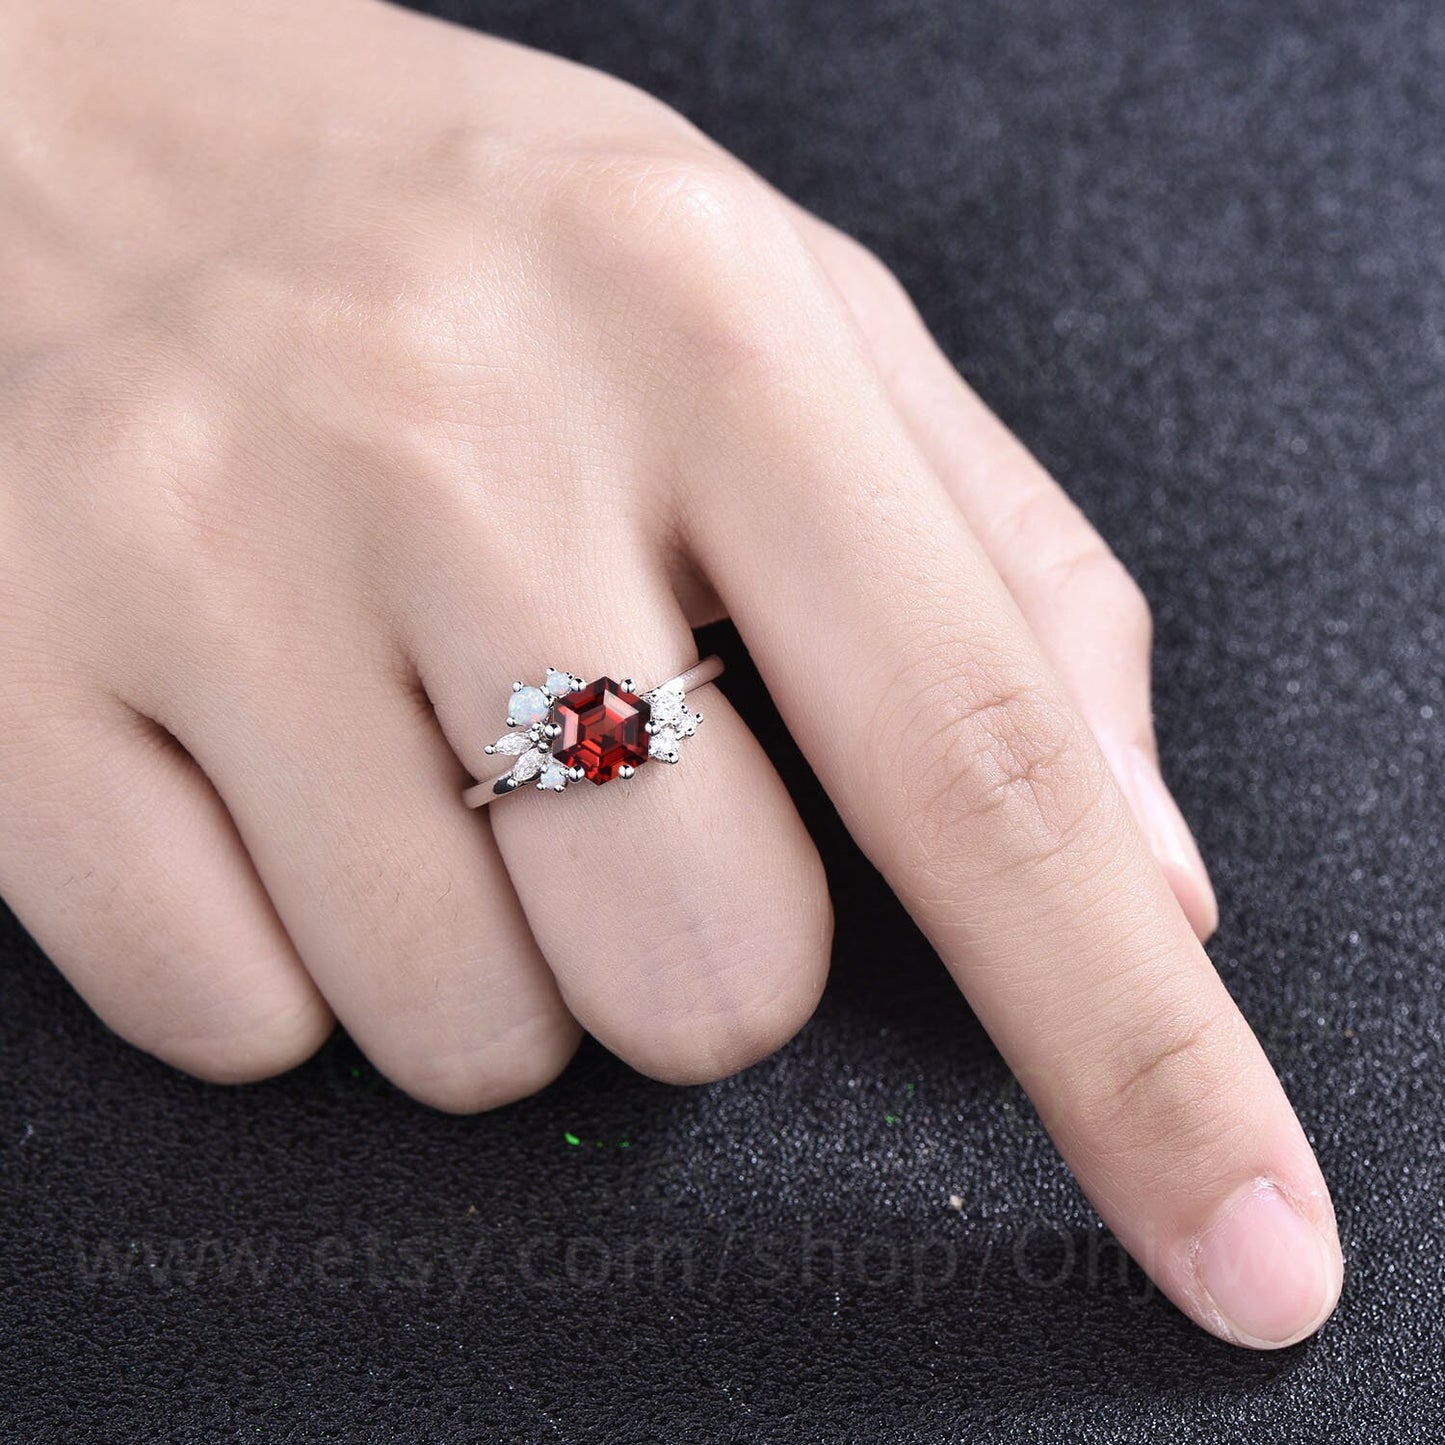 Vintage Hexagon cut red garnet ring engagement ring art deco cluster opal ring rose gold silver 6 prong set marquise diamond ring for women